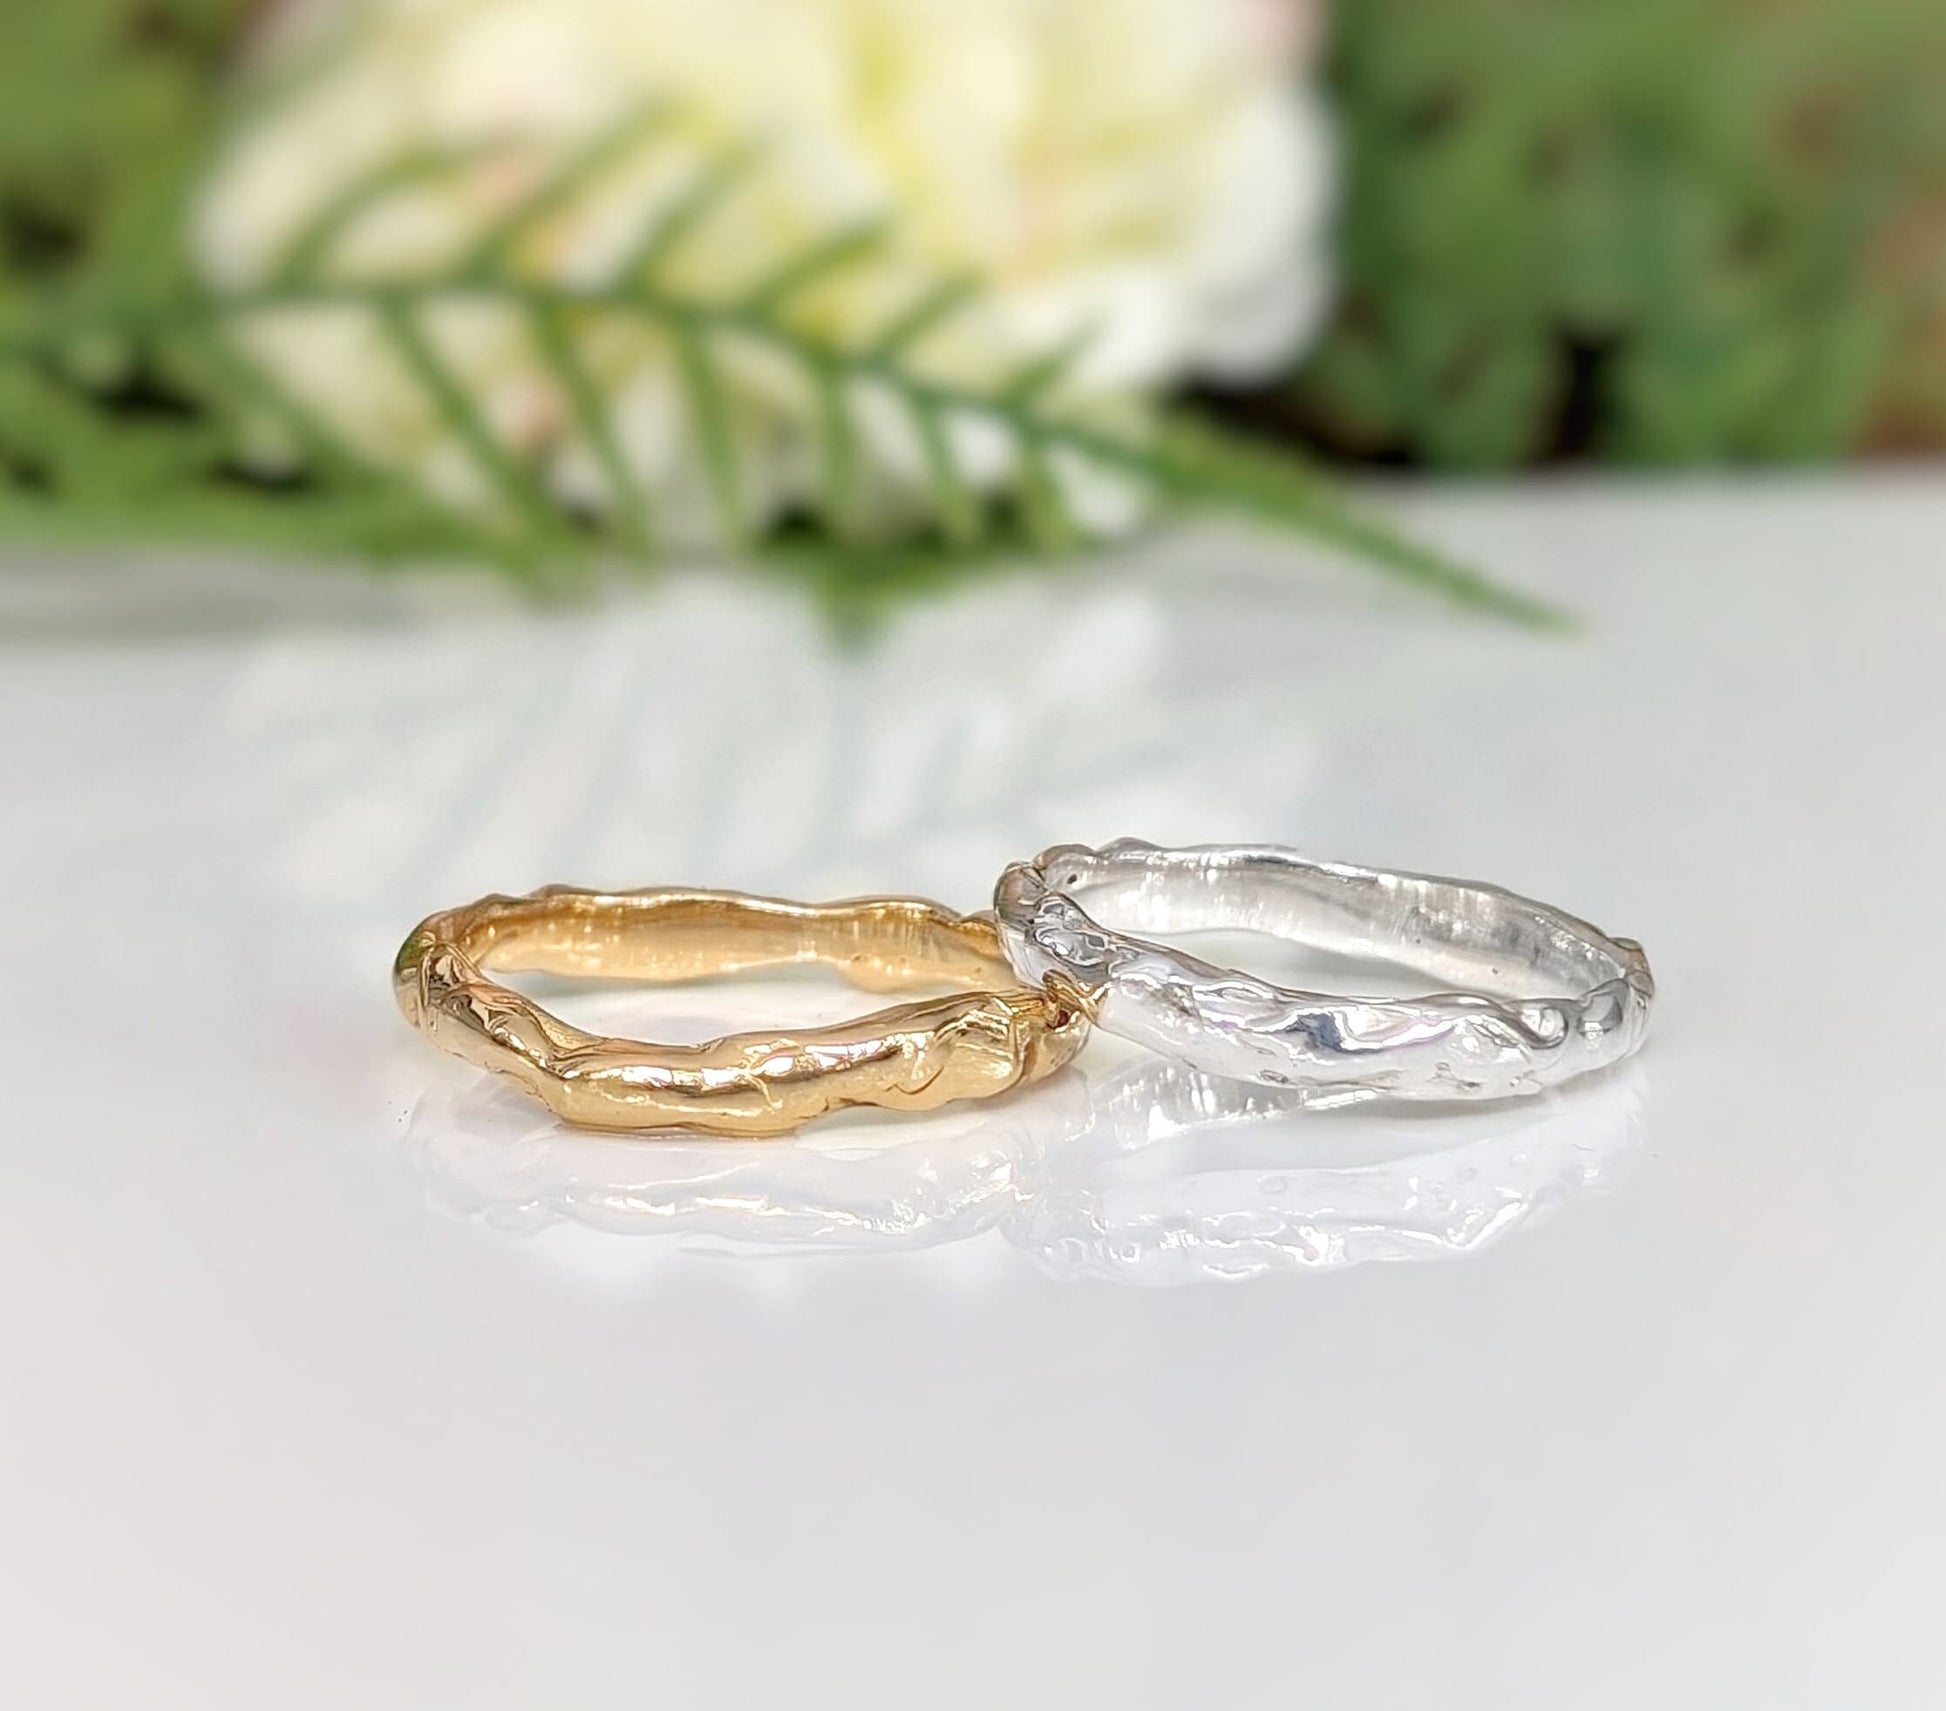 Set of 2 Solid Sterling Silver and 14k Gold molten textured bands